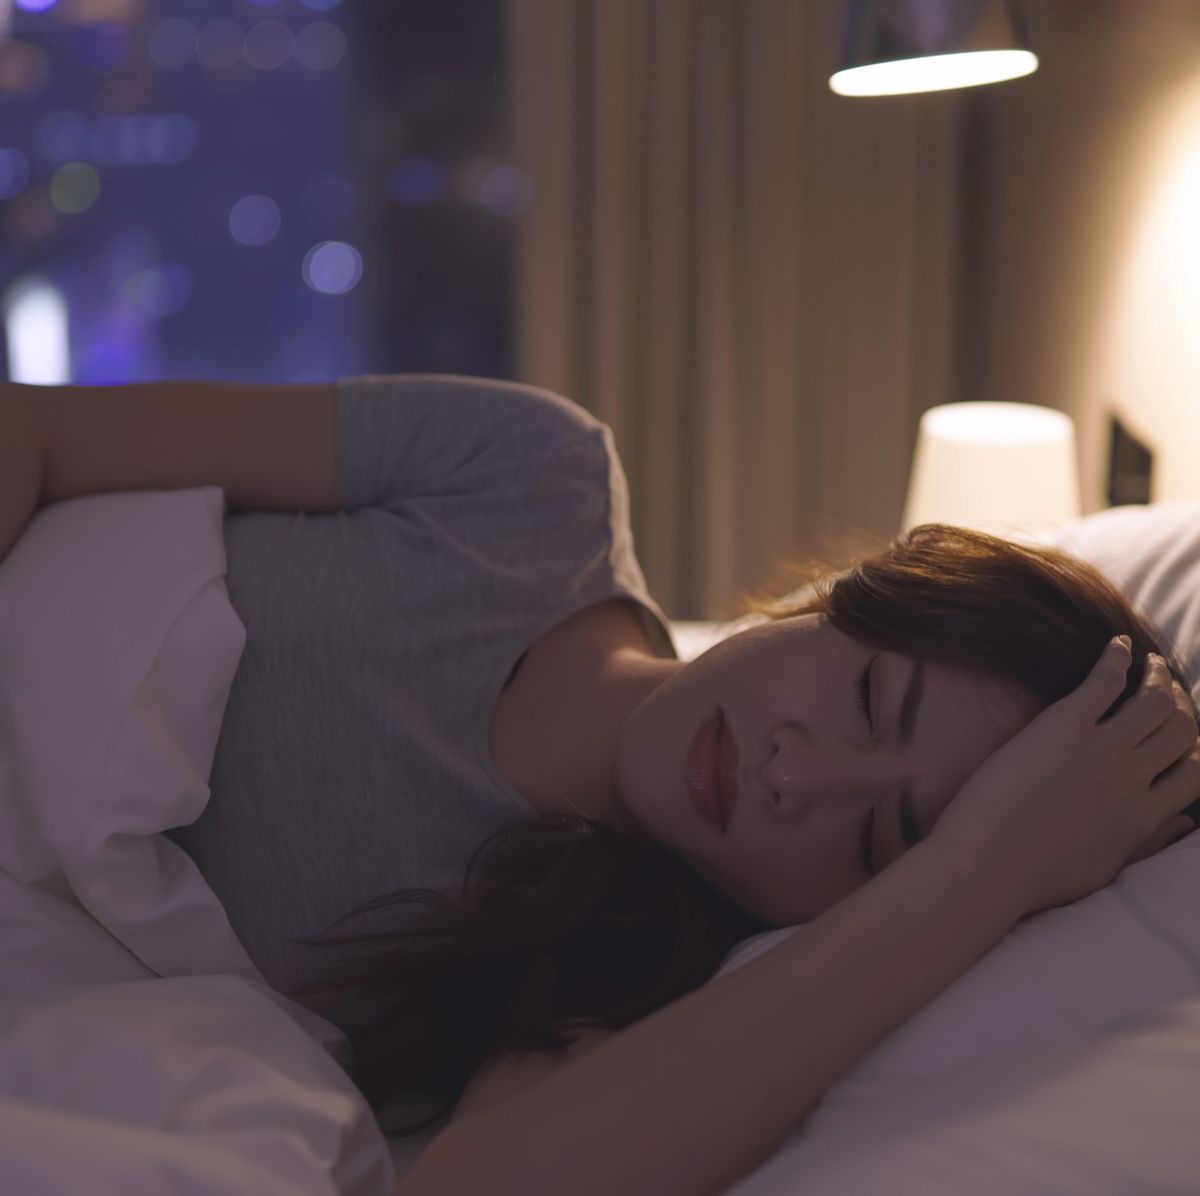 asian woman lose sleep, importance of sleep for gut problems